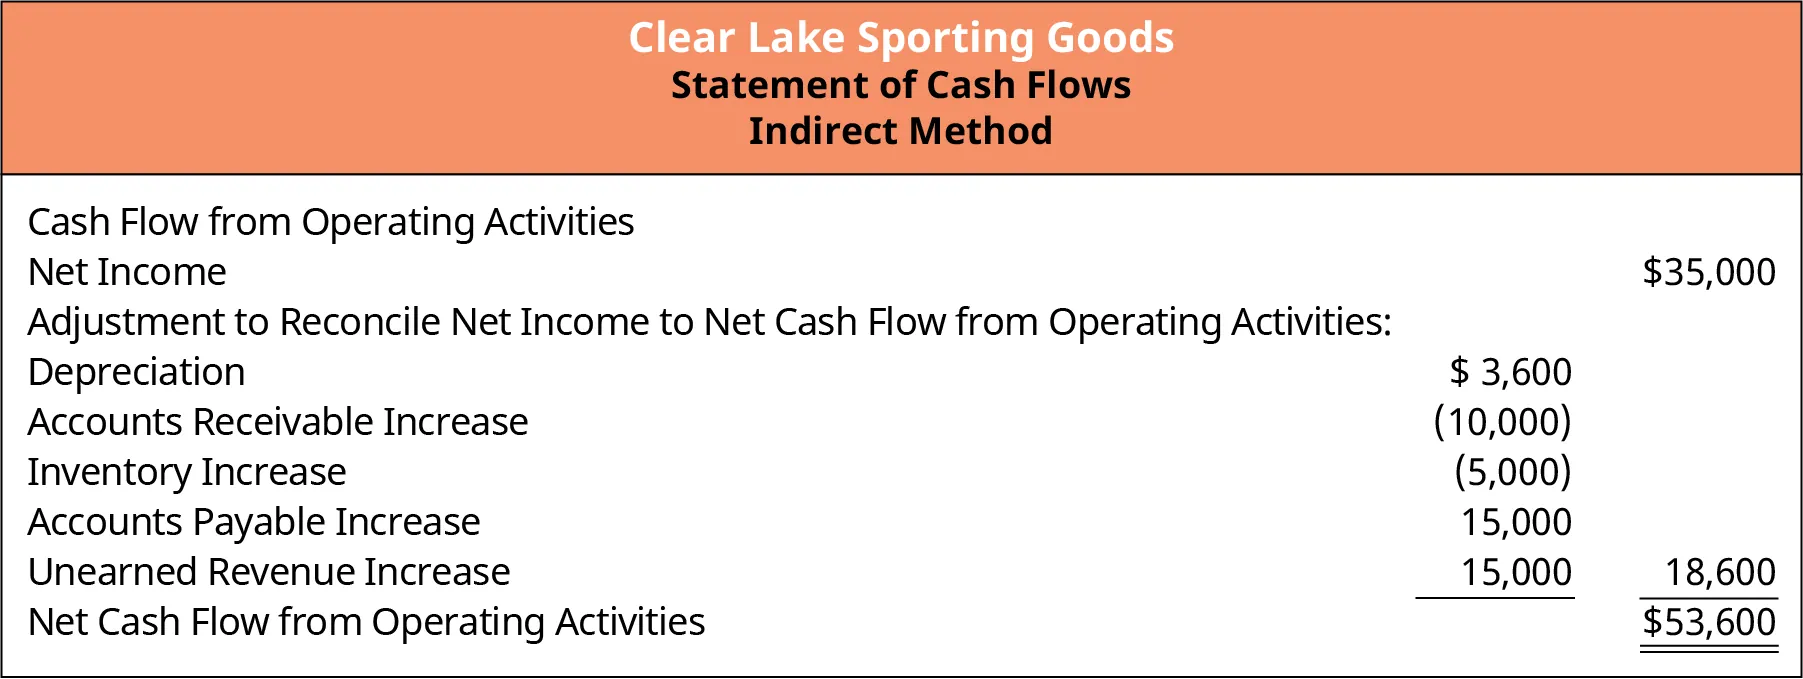 Operating Activities Section of the Statement of Cash Flows for Clear Lake Sporting Goods. The net cash flow from operating activities is $53,600.